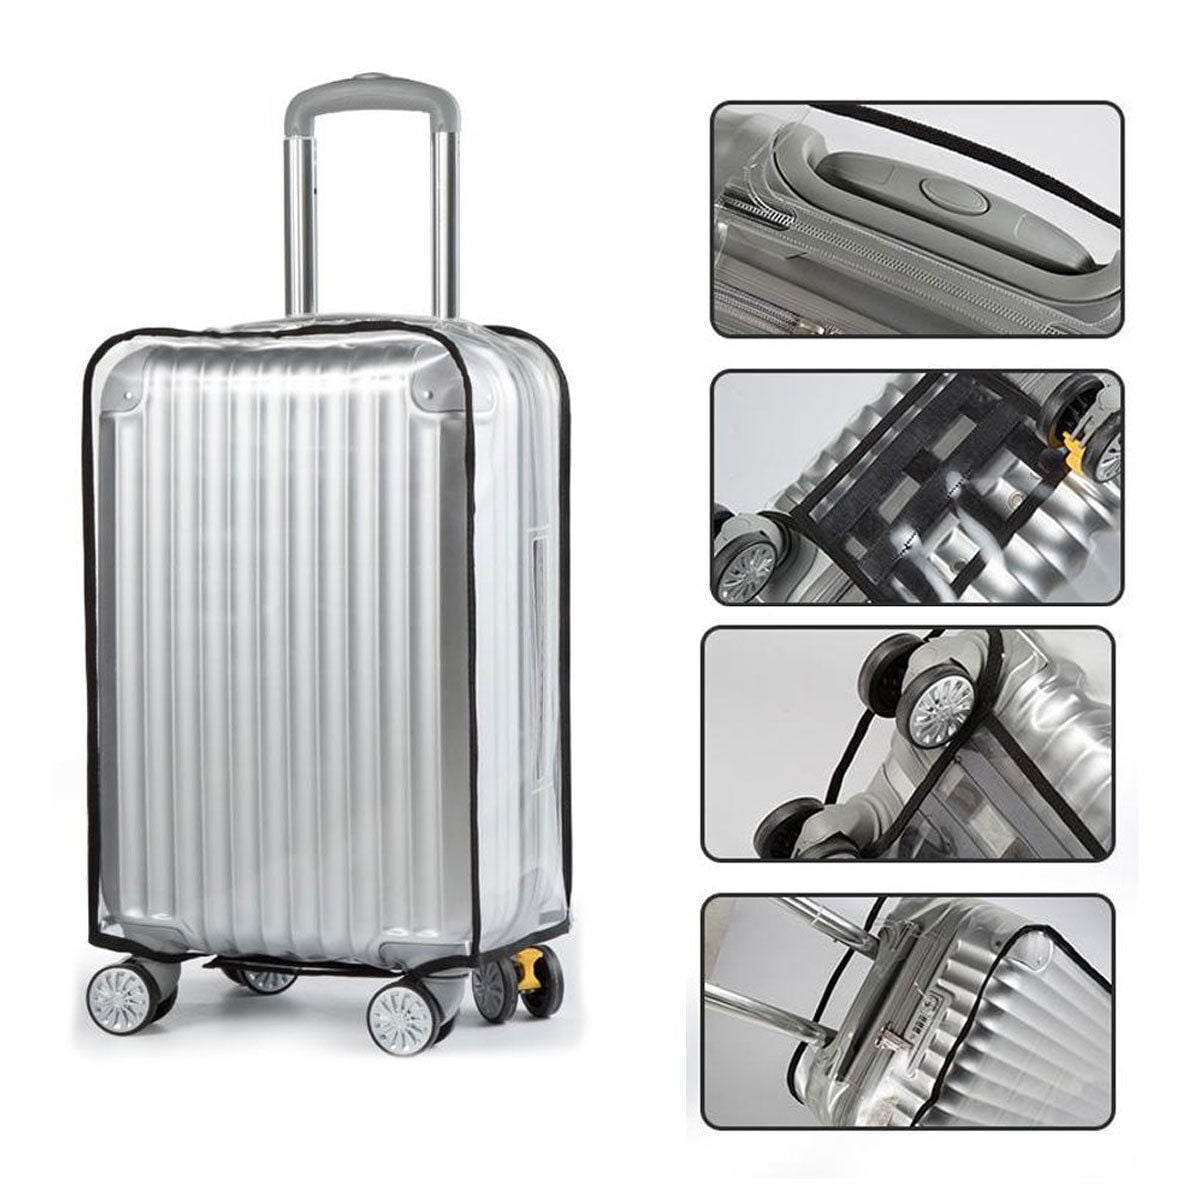 18 20 22 26 28 30 Inch Luggage Cover Protector Bag PVC Clear Plastic  Suitcase US